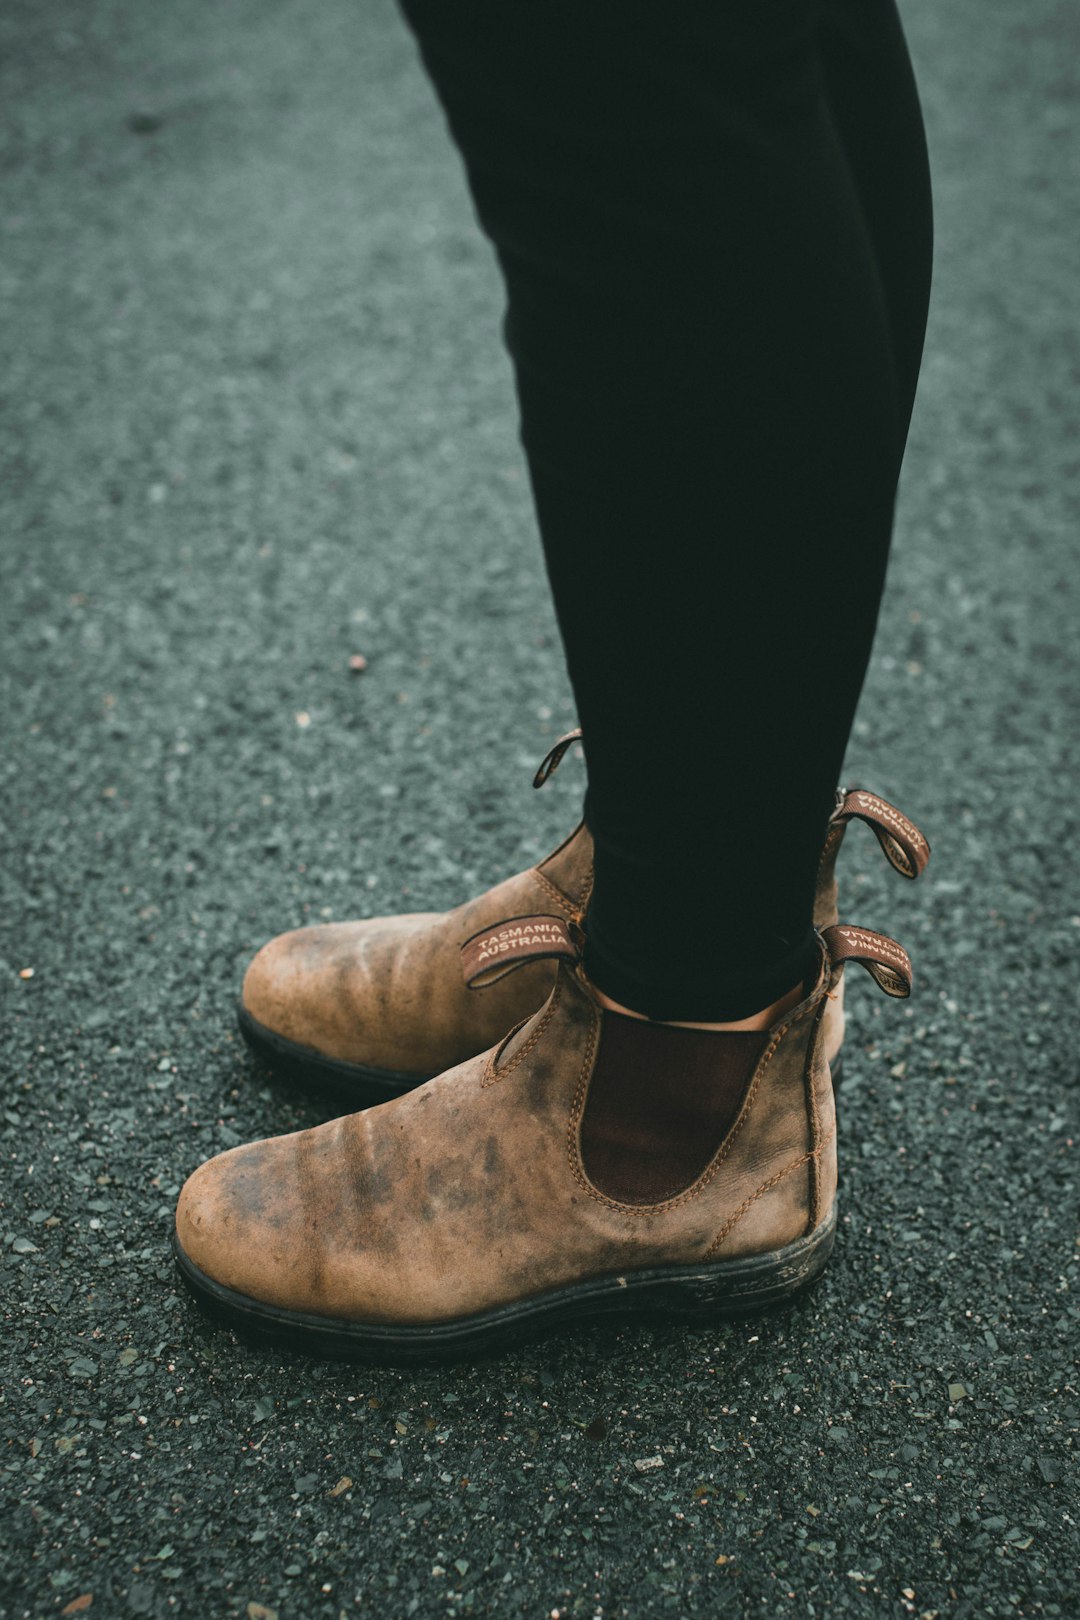 person wearing brown leather boots